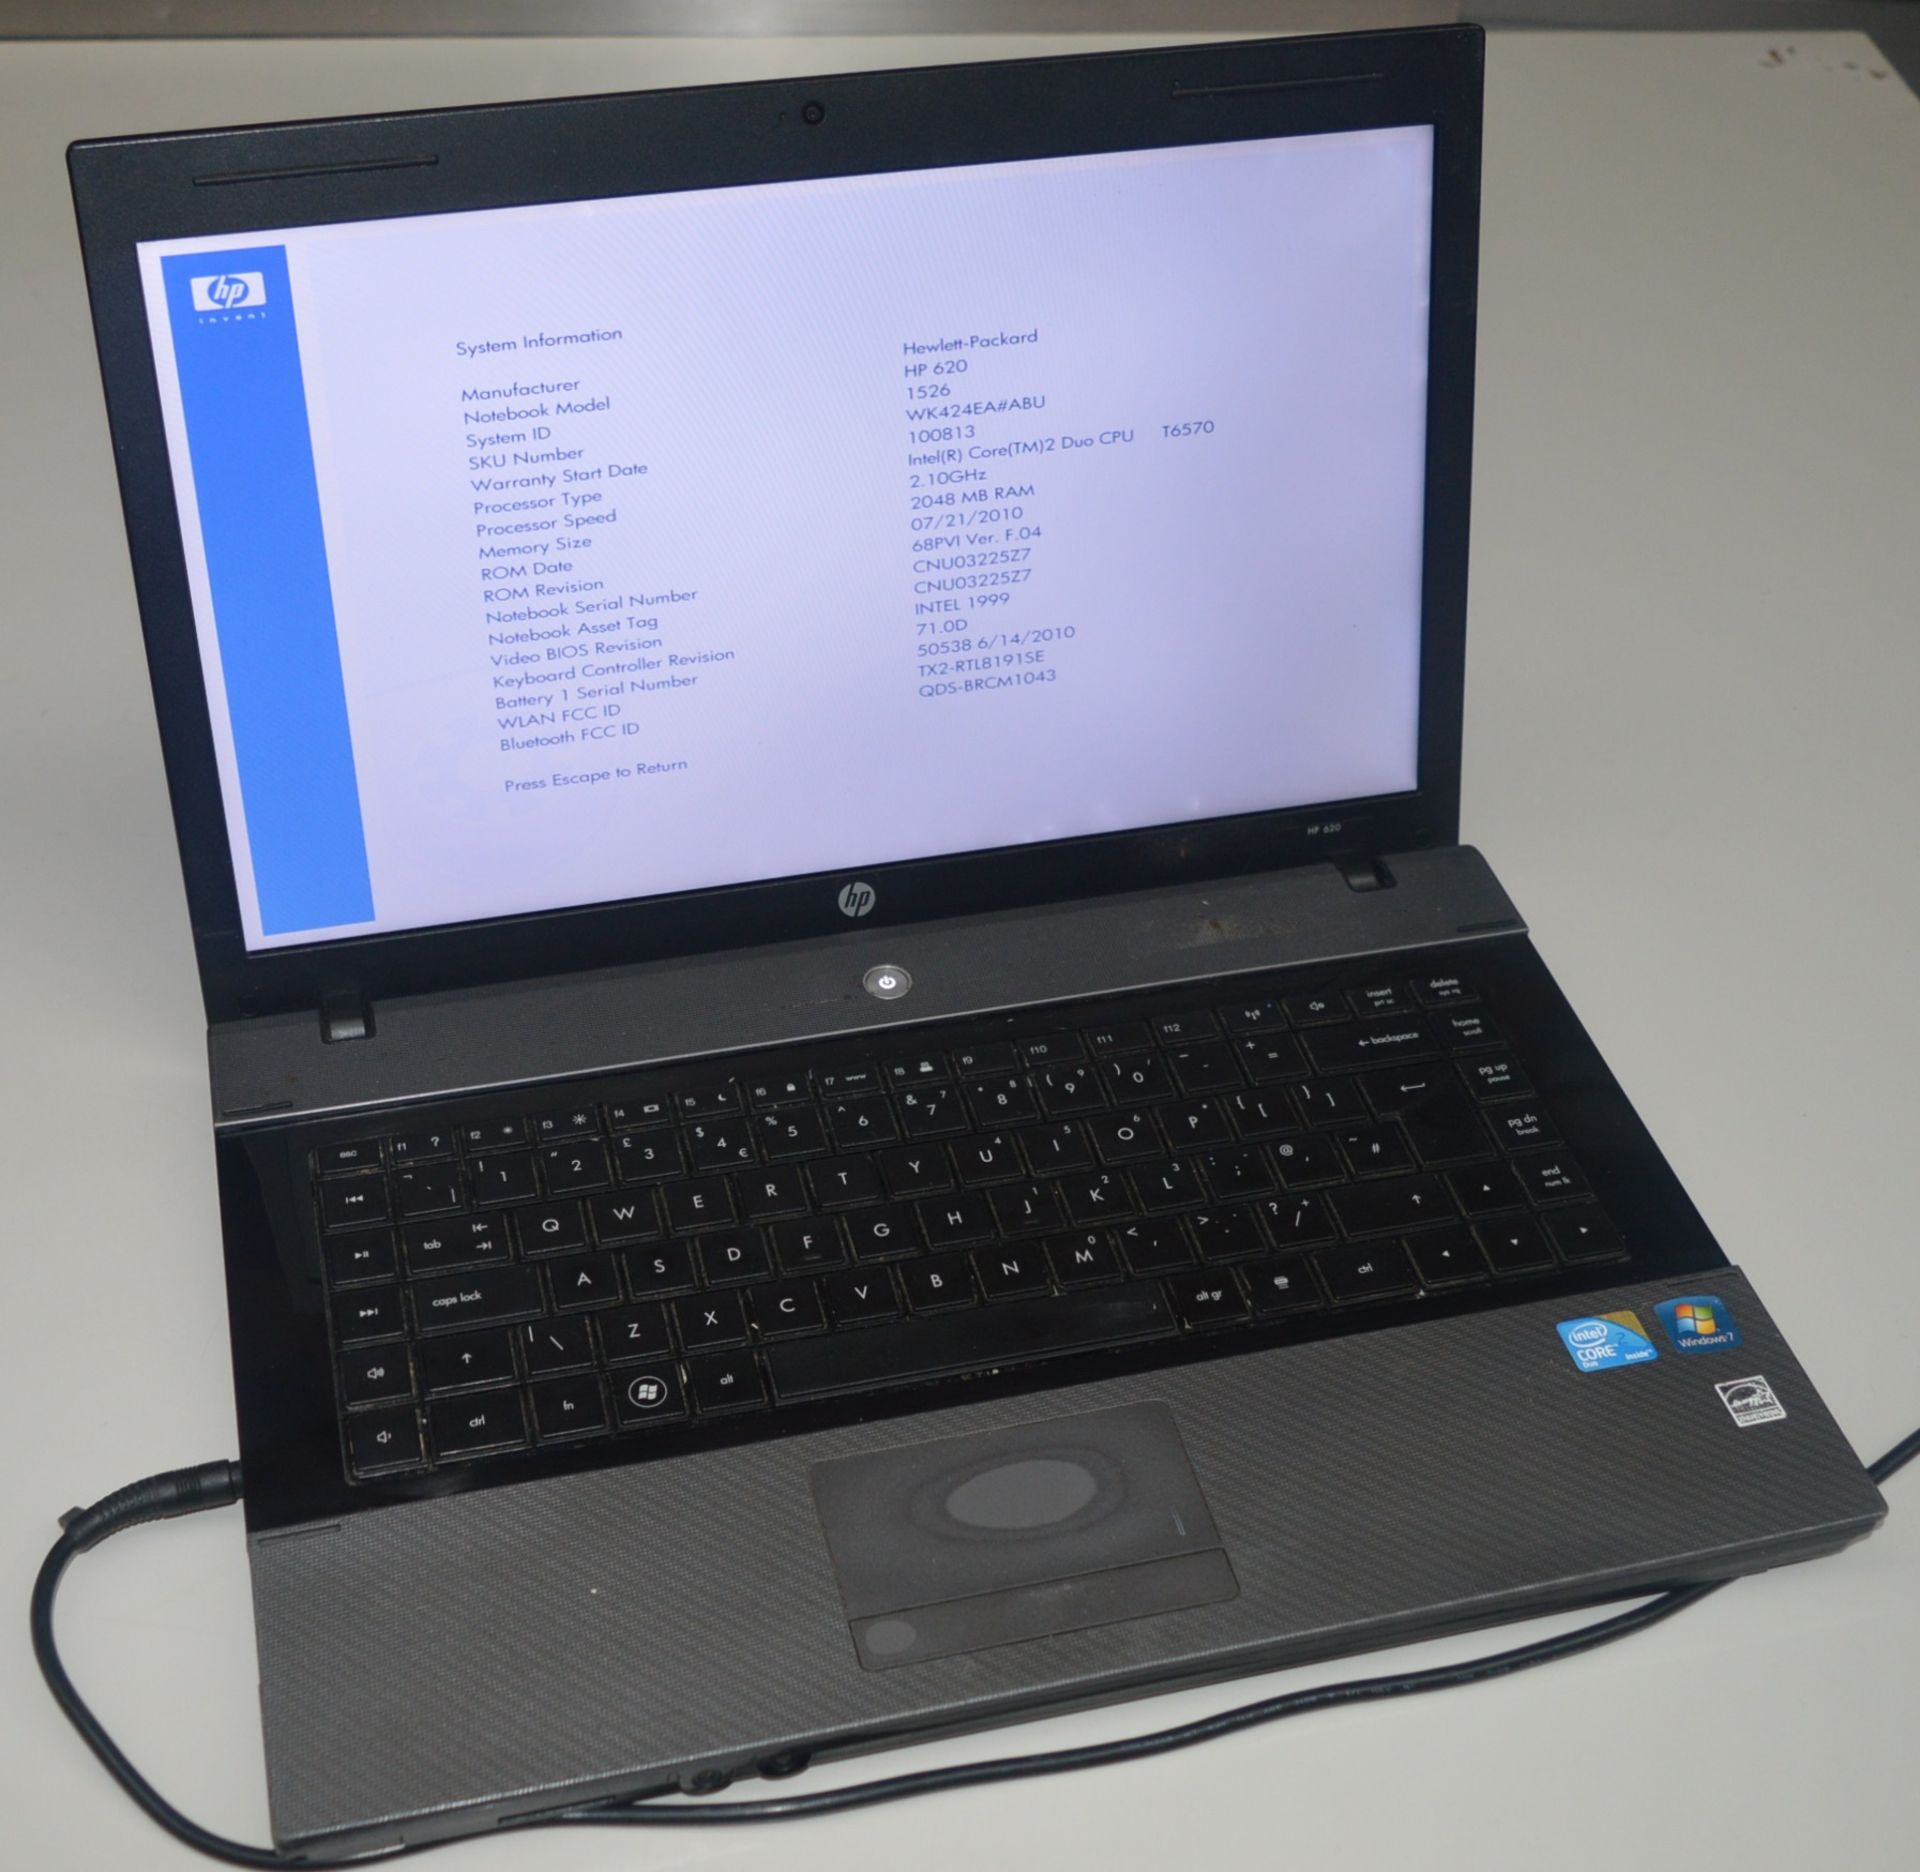 1 x HP Intel Core 2 Duo Laptop - Features a T6570 2.1ghz Processor,160gb Hard Drive, 2gb Ram,